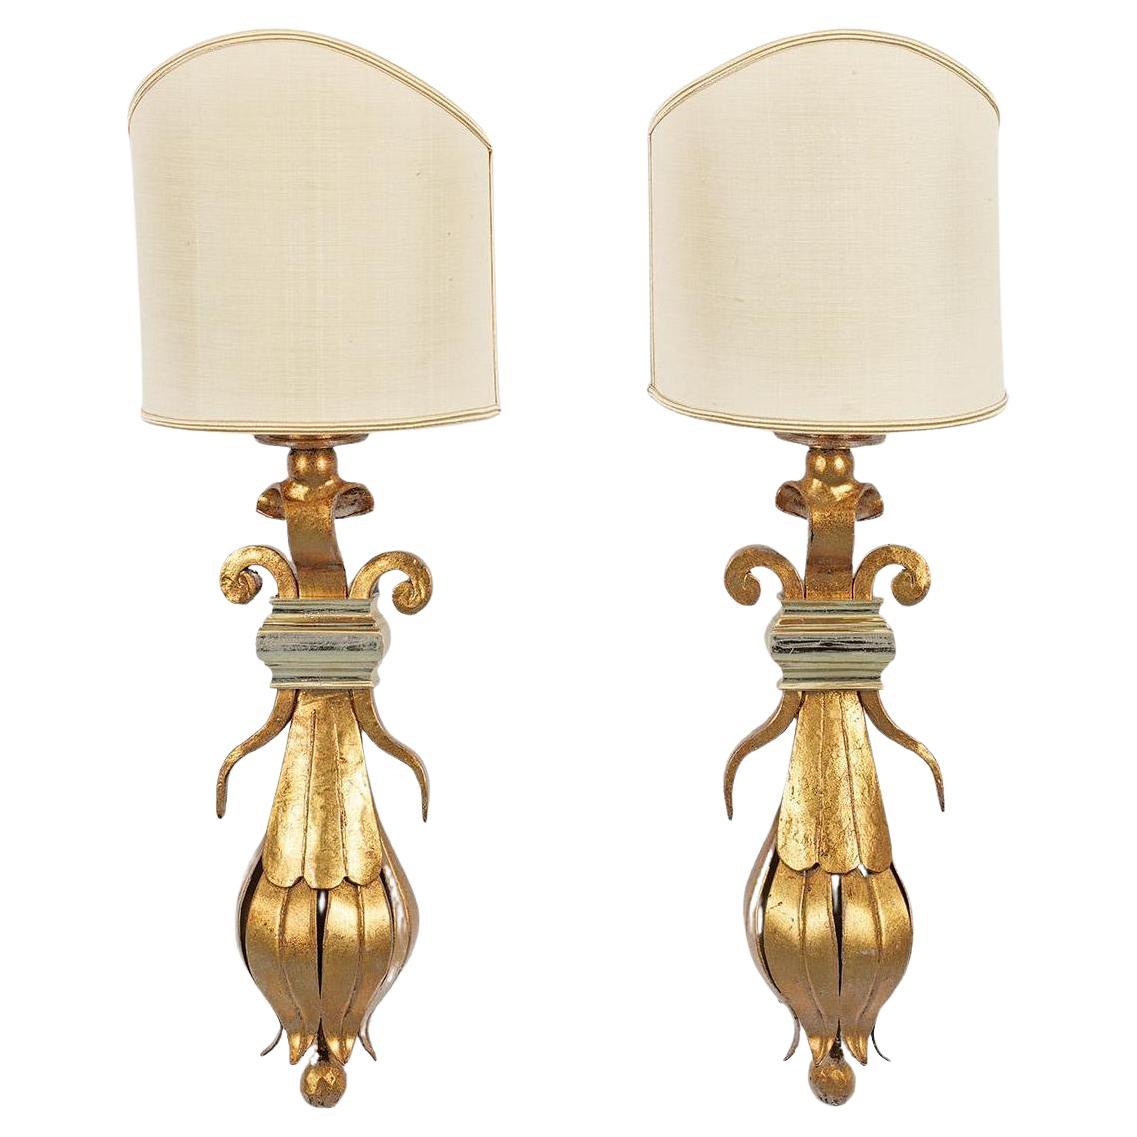 Empire Revival Wall Lights and Sconces